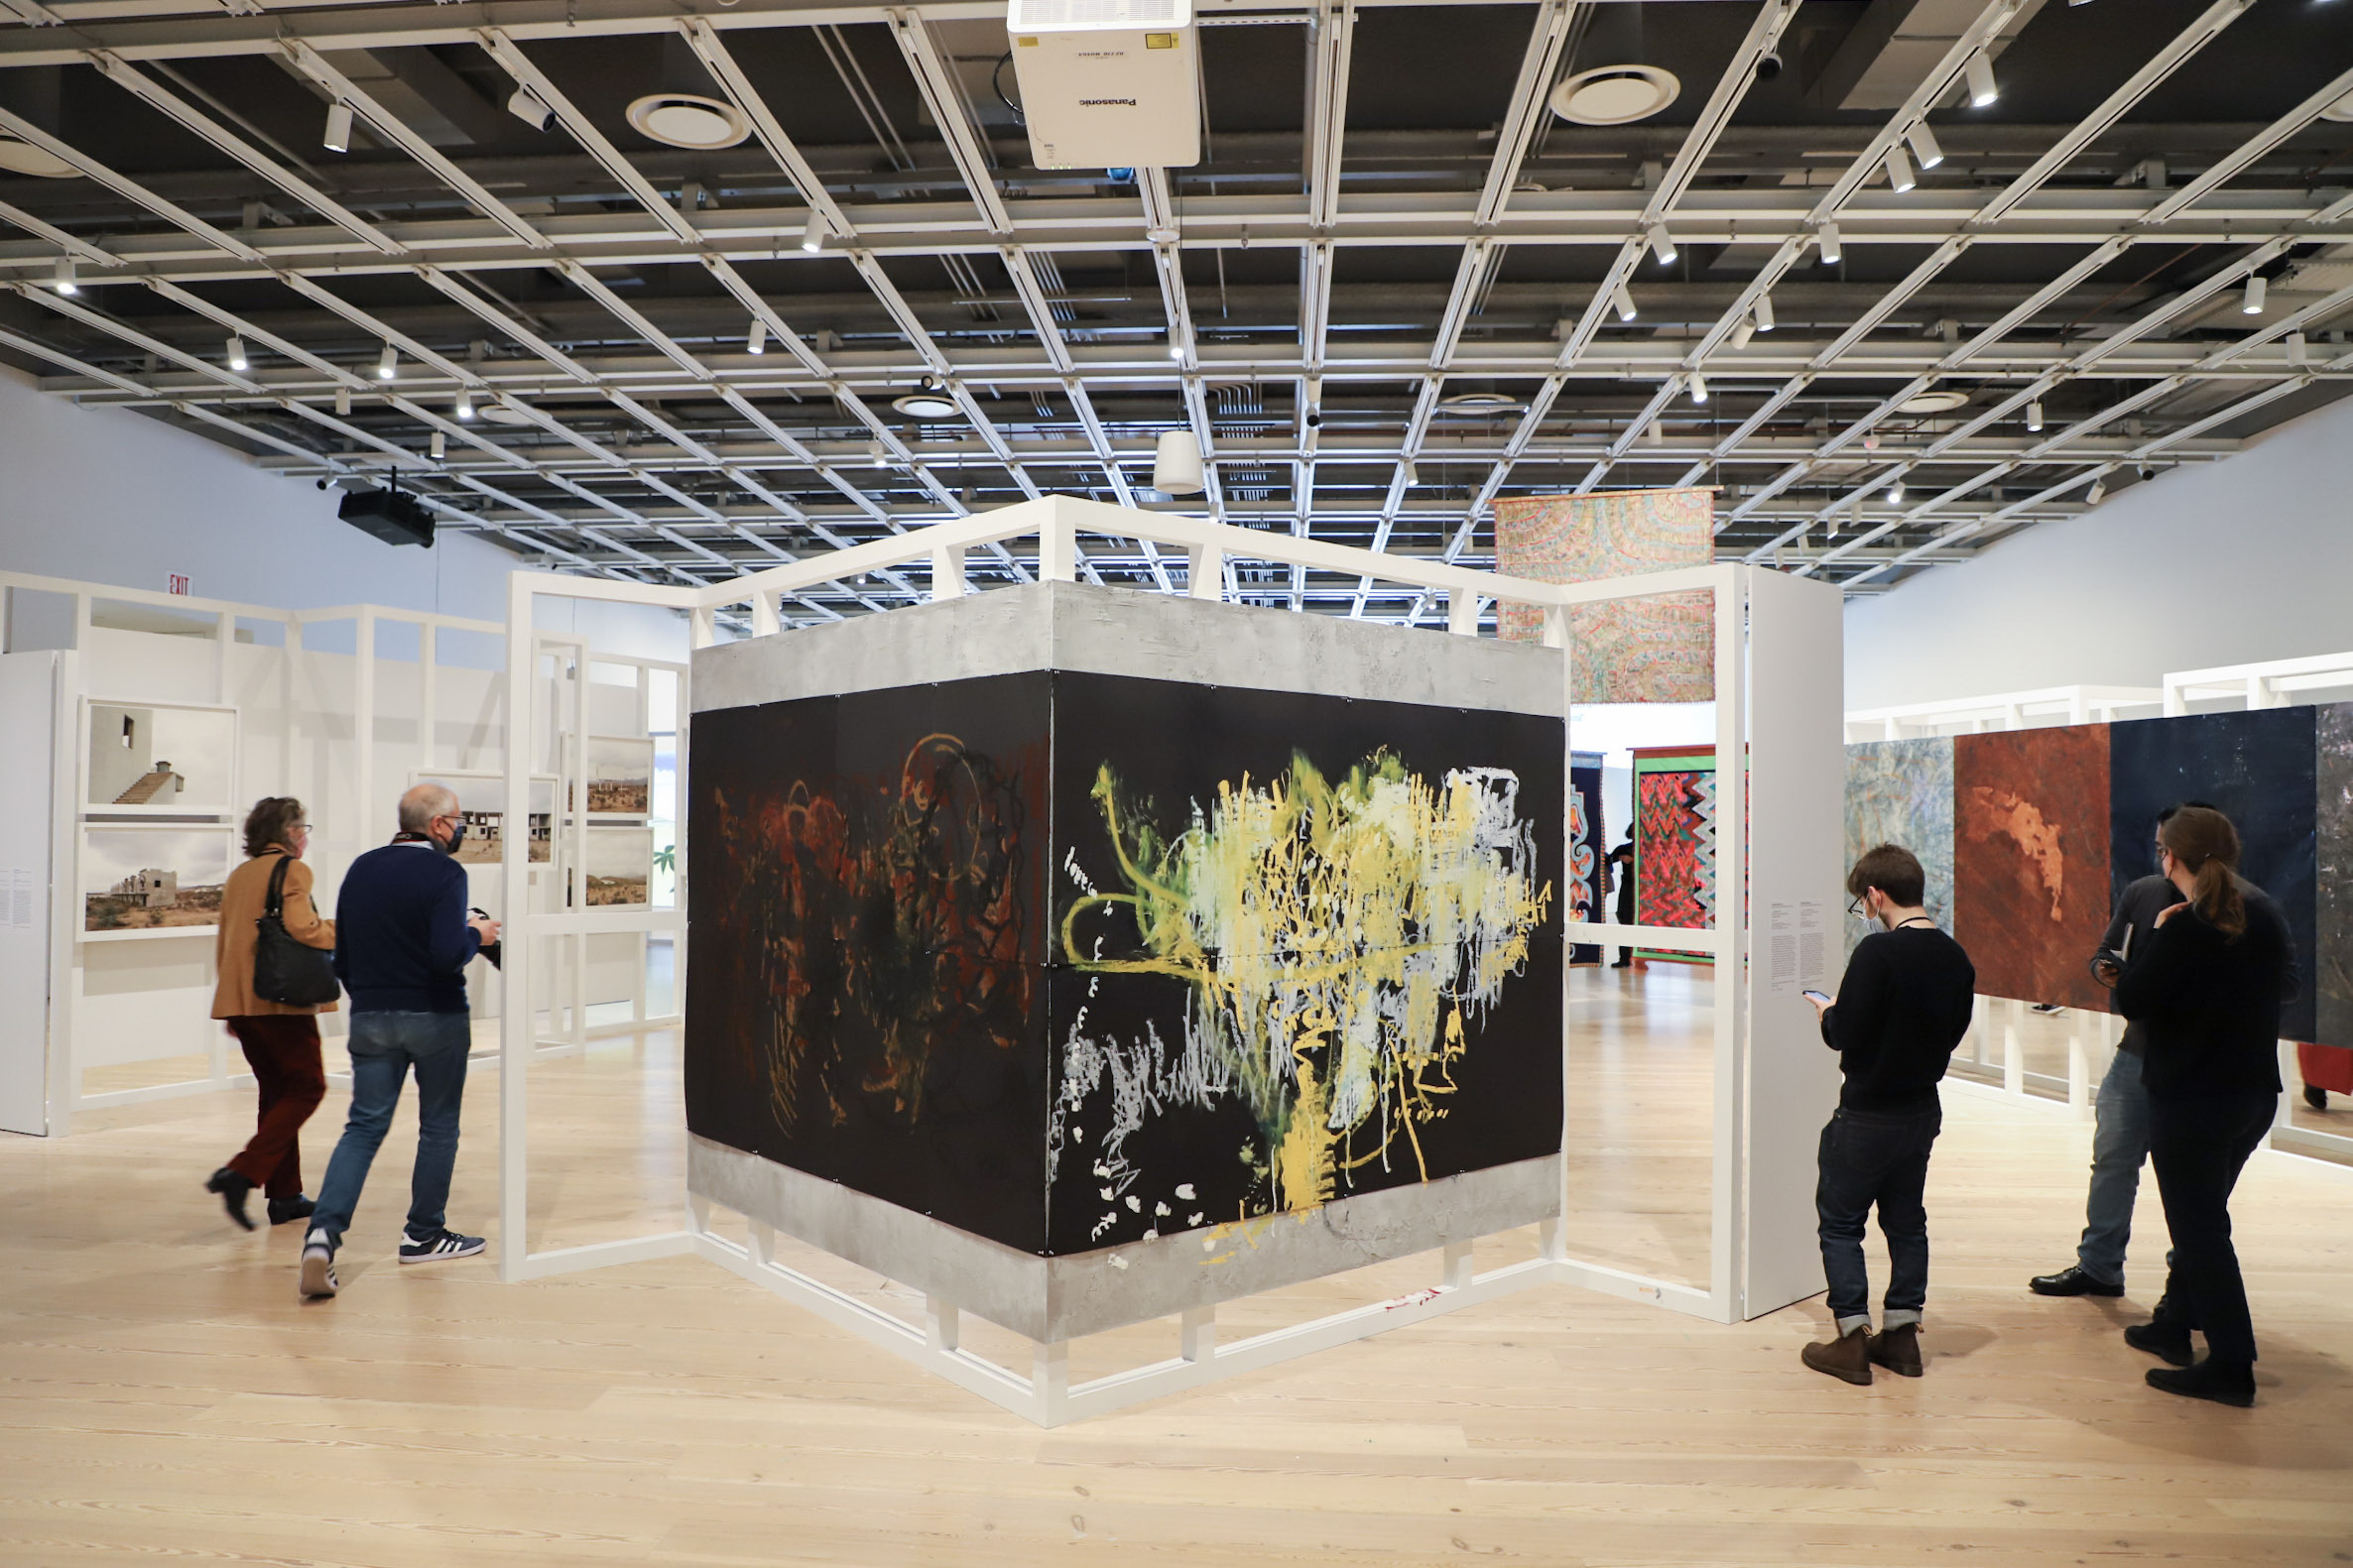 Year in Review: The 5 best art exhibits we saw this year